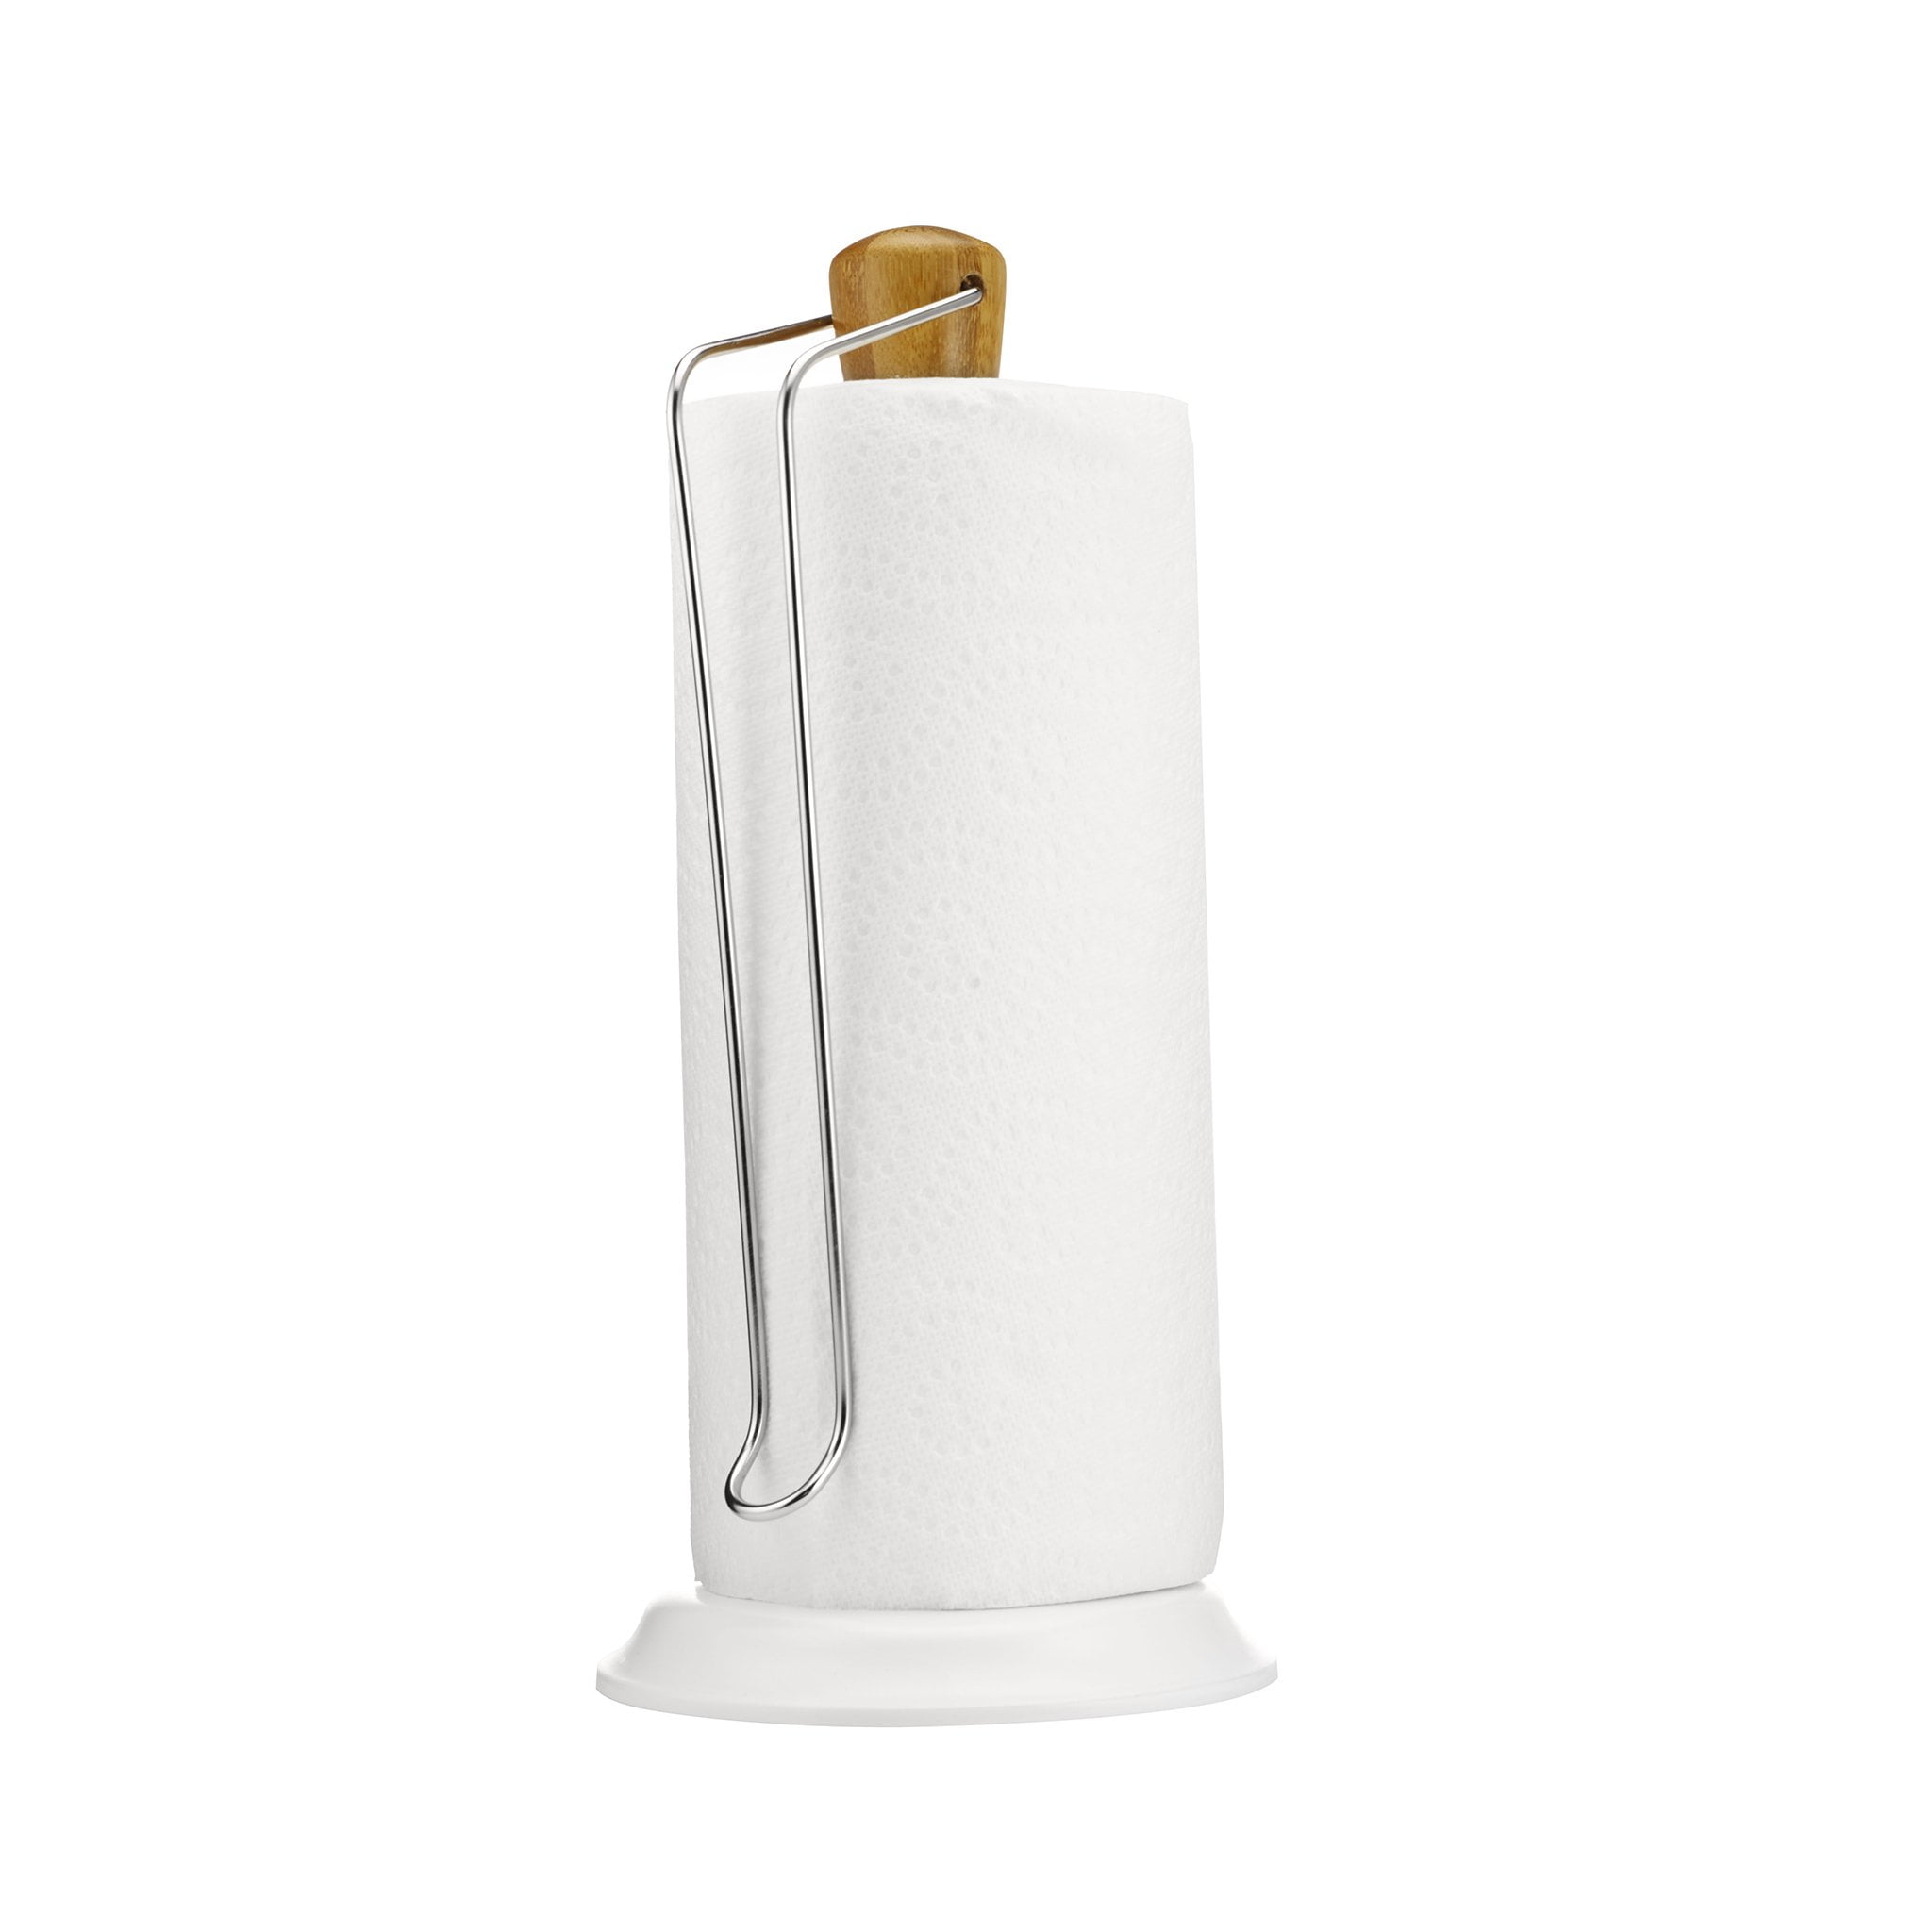 Rivers Edge Products Countertop Paper Towel Holder, Unique Resin